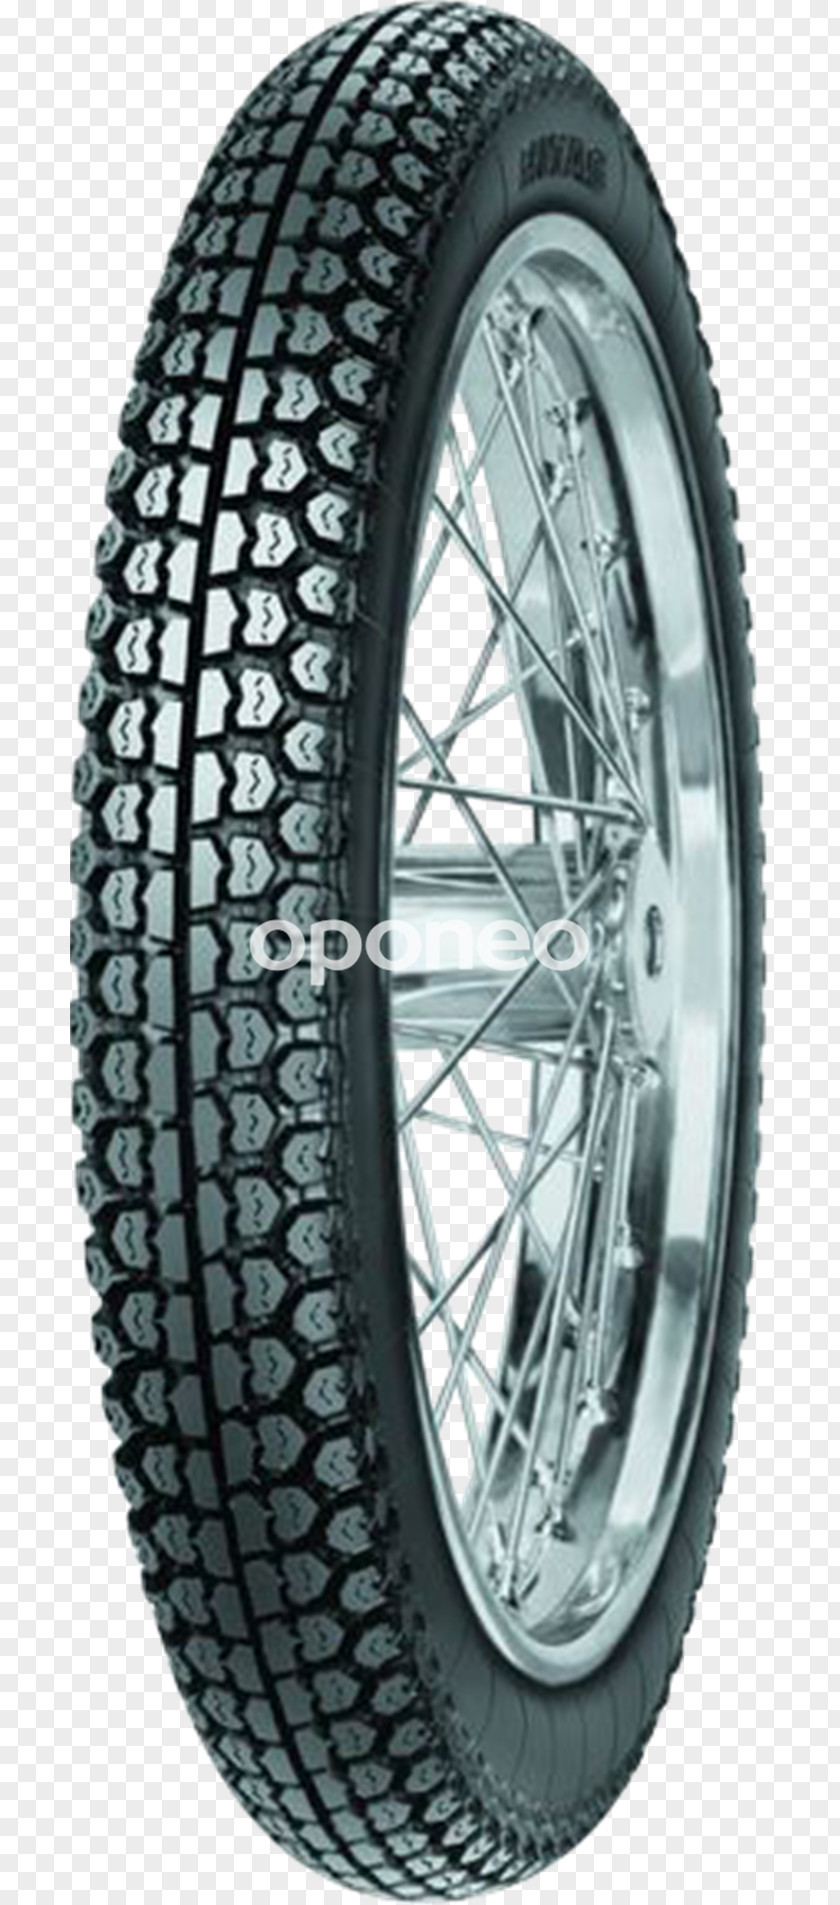 Motorcycle Tires Scooter Goodyear Dunlop Sava PNG